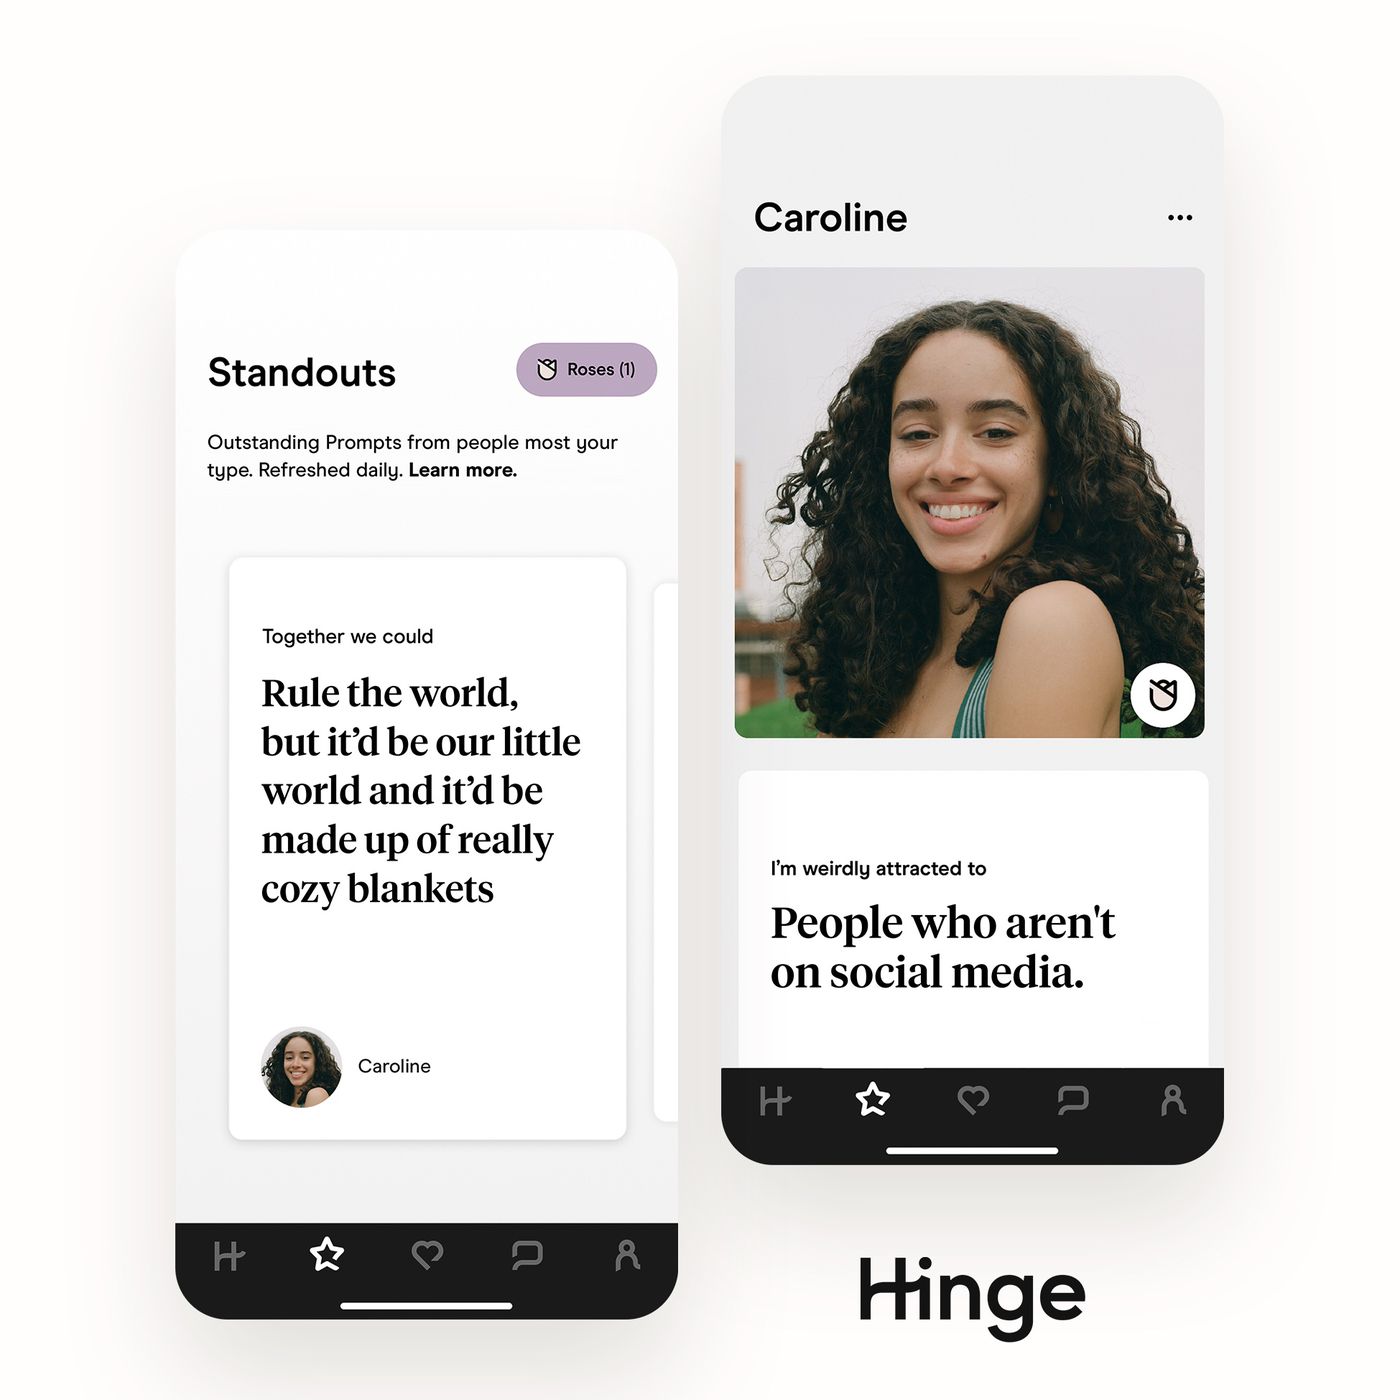 Hinge is about to become The Bachelor - The Verge